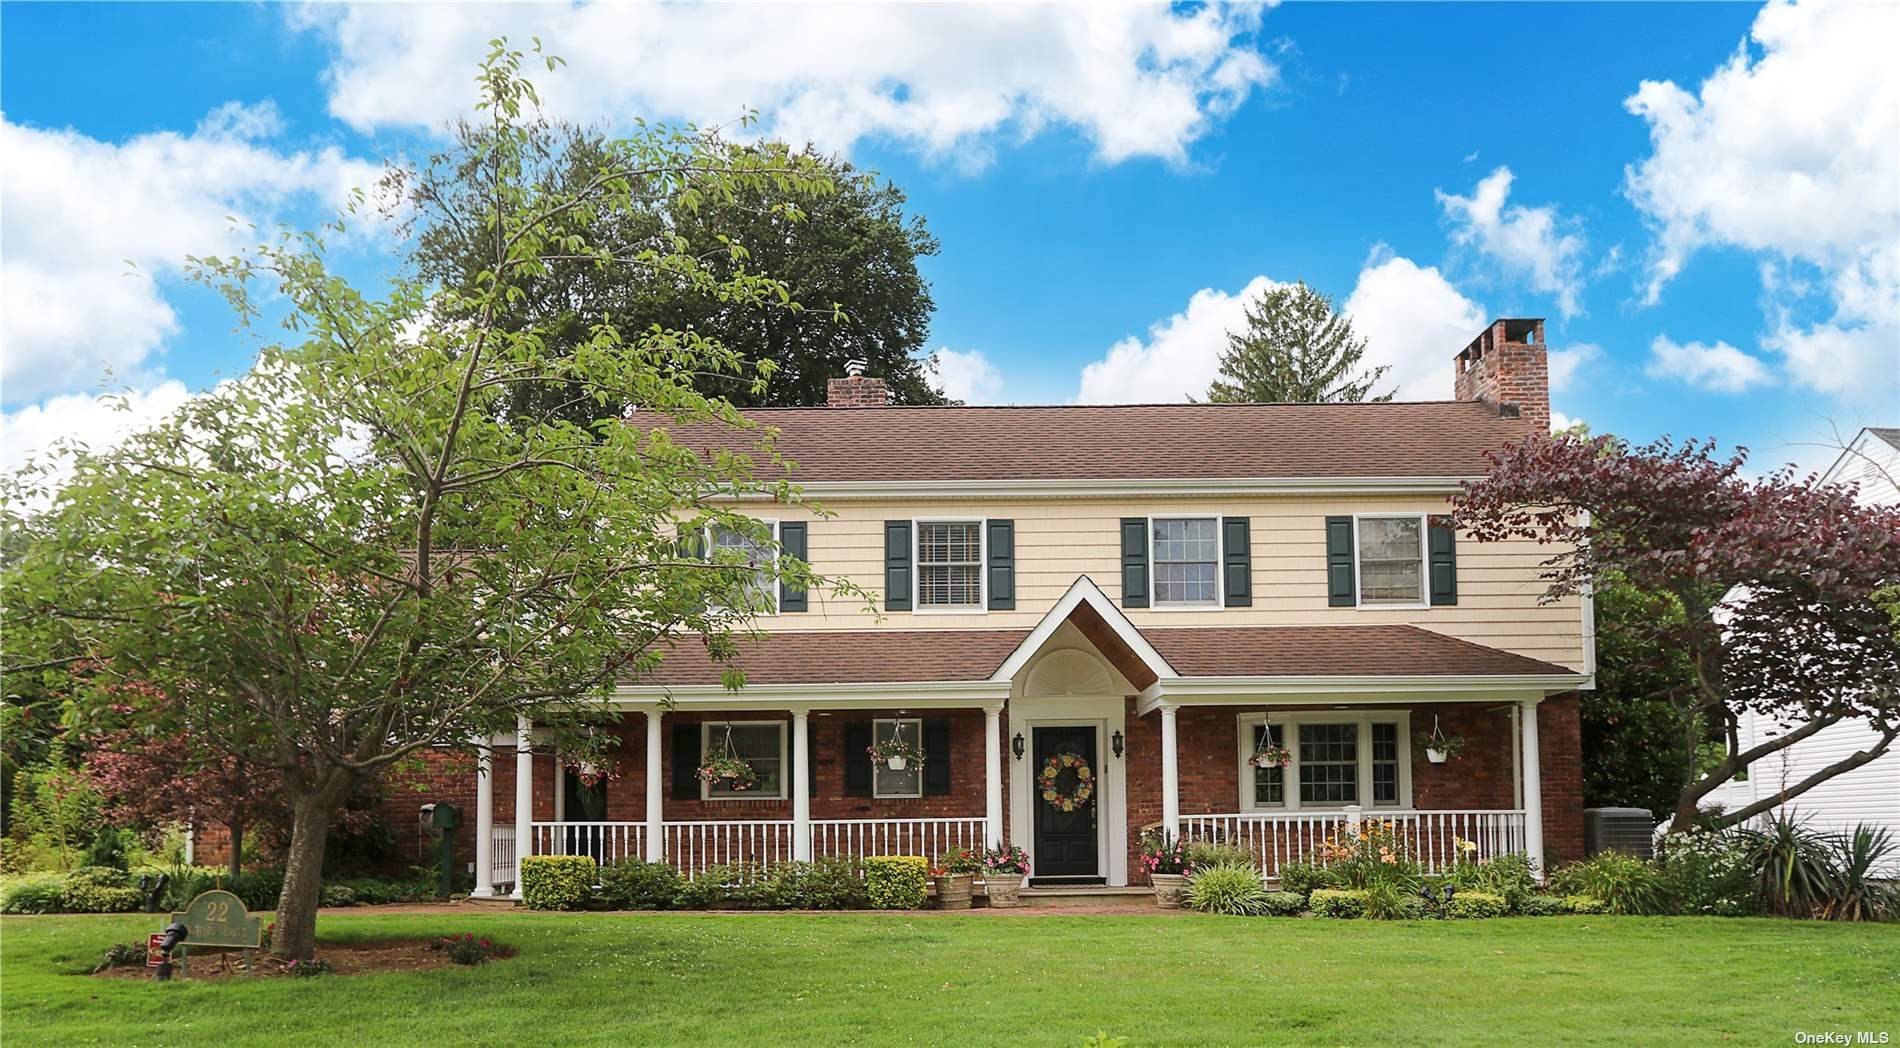 Charming, lovingly maintained 4 bedroom, 3 bath colonial features a front porch that provides an inviting and picturesque entryway.